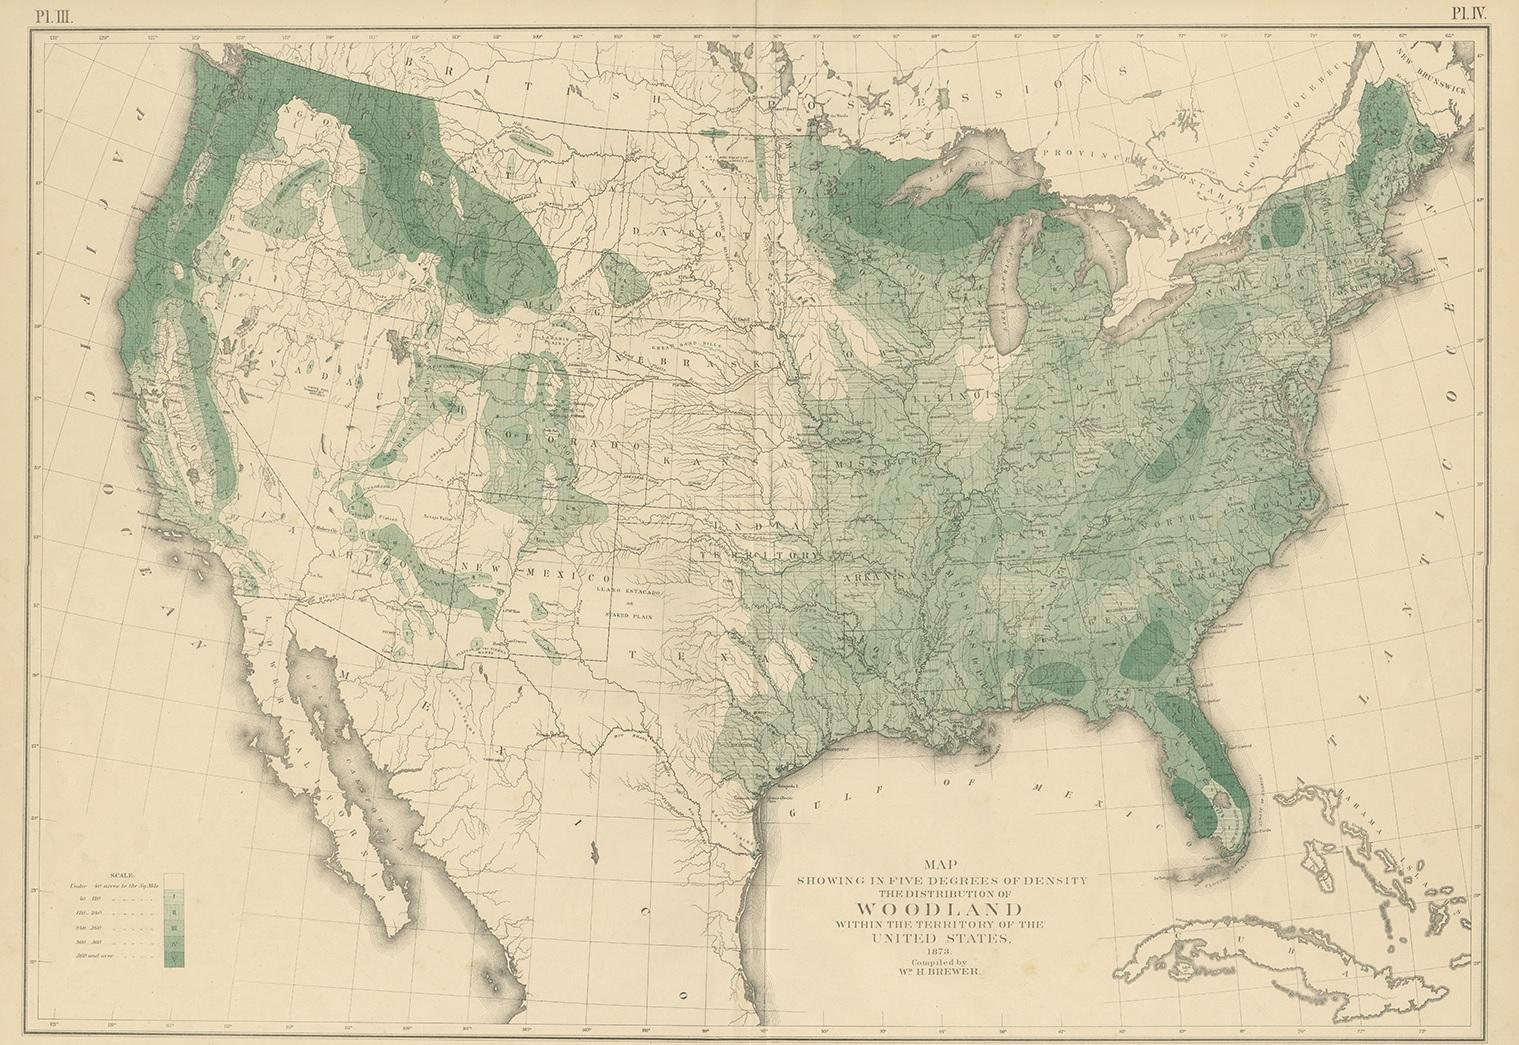 Antique map titled 'Map showing in five degrees of density the distribution of woodland within the territory of the United States, 1873. Compiled by Wm. H. Brewer'. Antique map of the woodland of the United States. Originates from 'Statistical Atlas